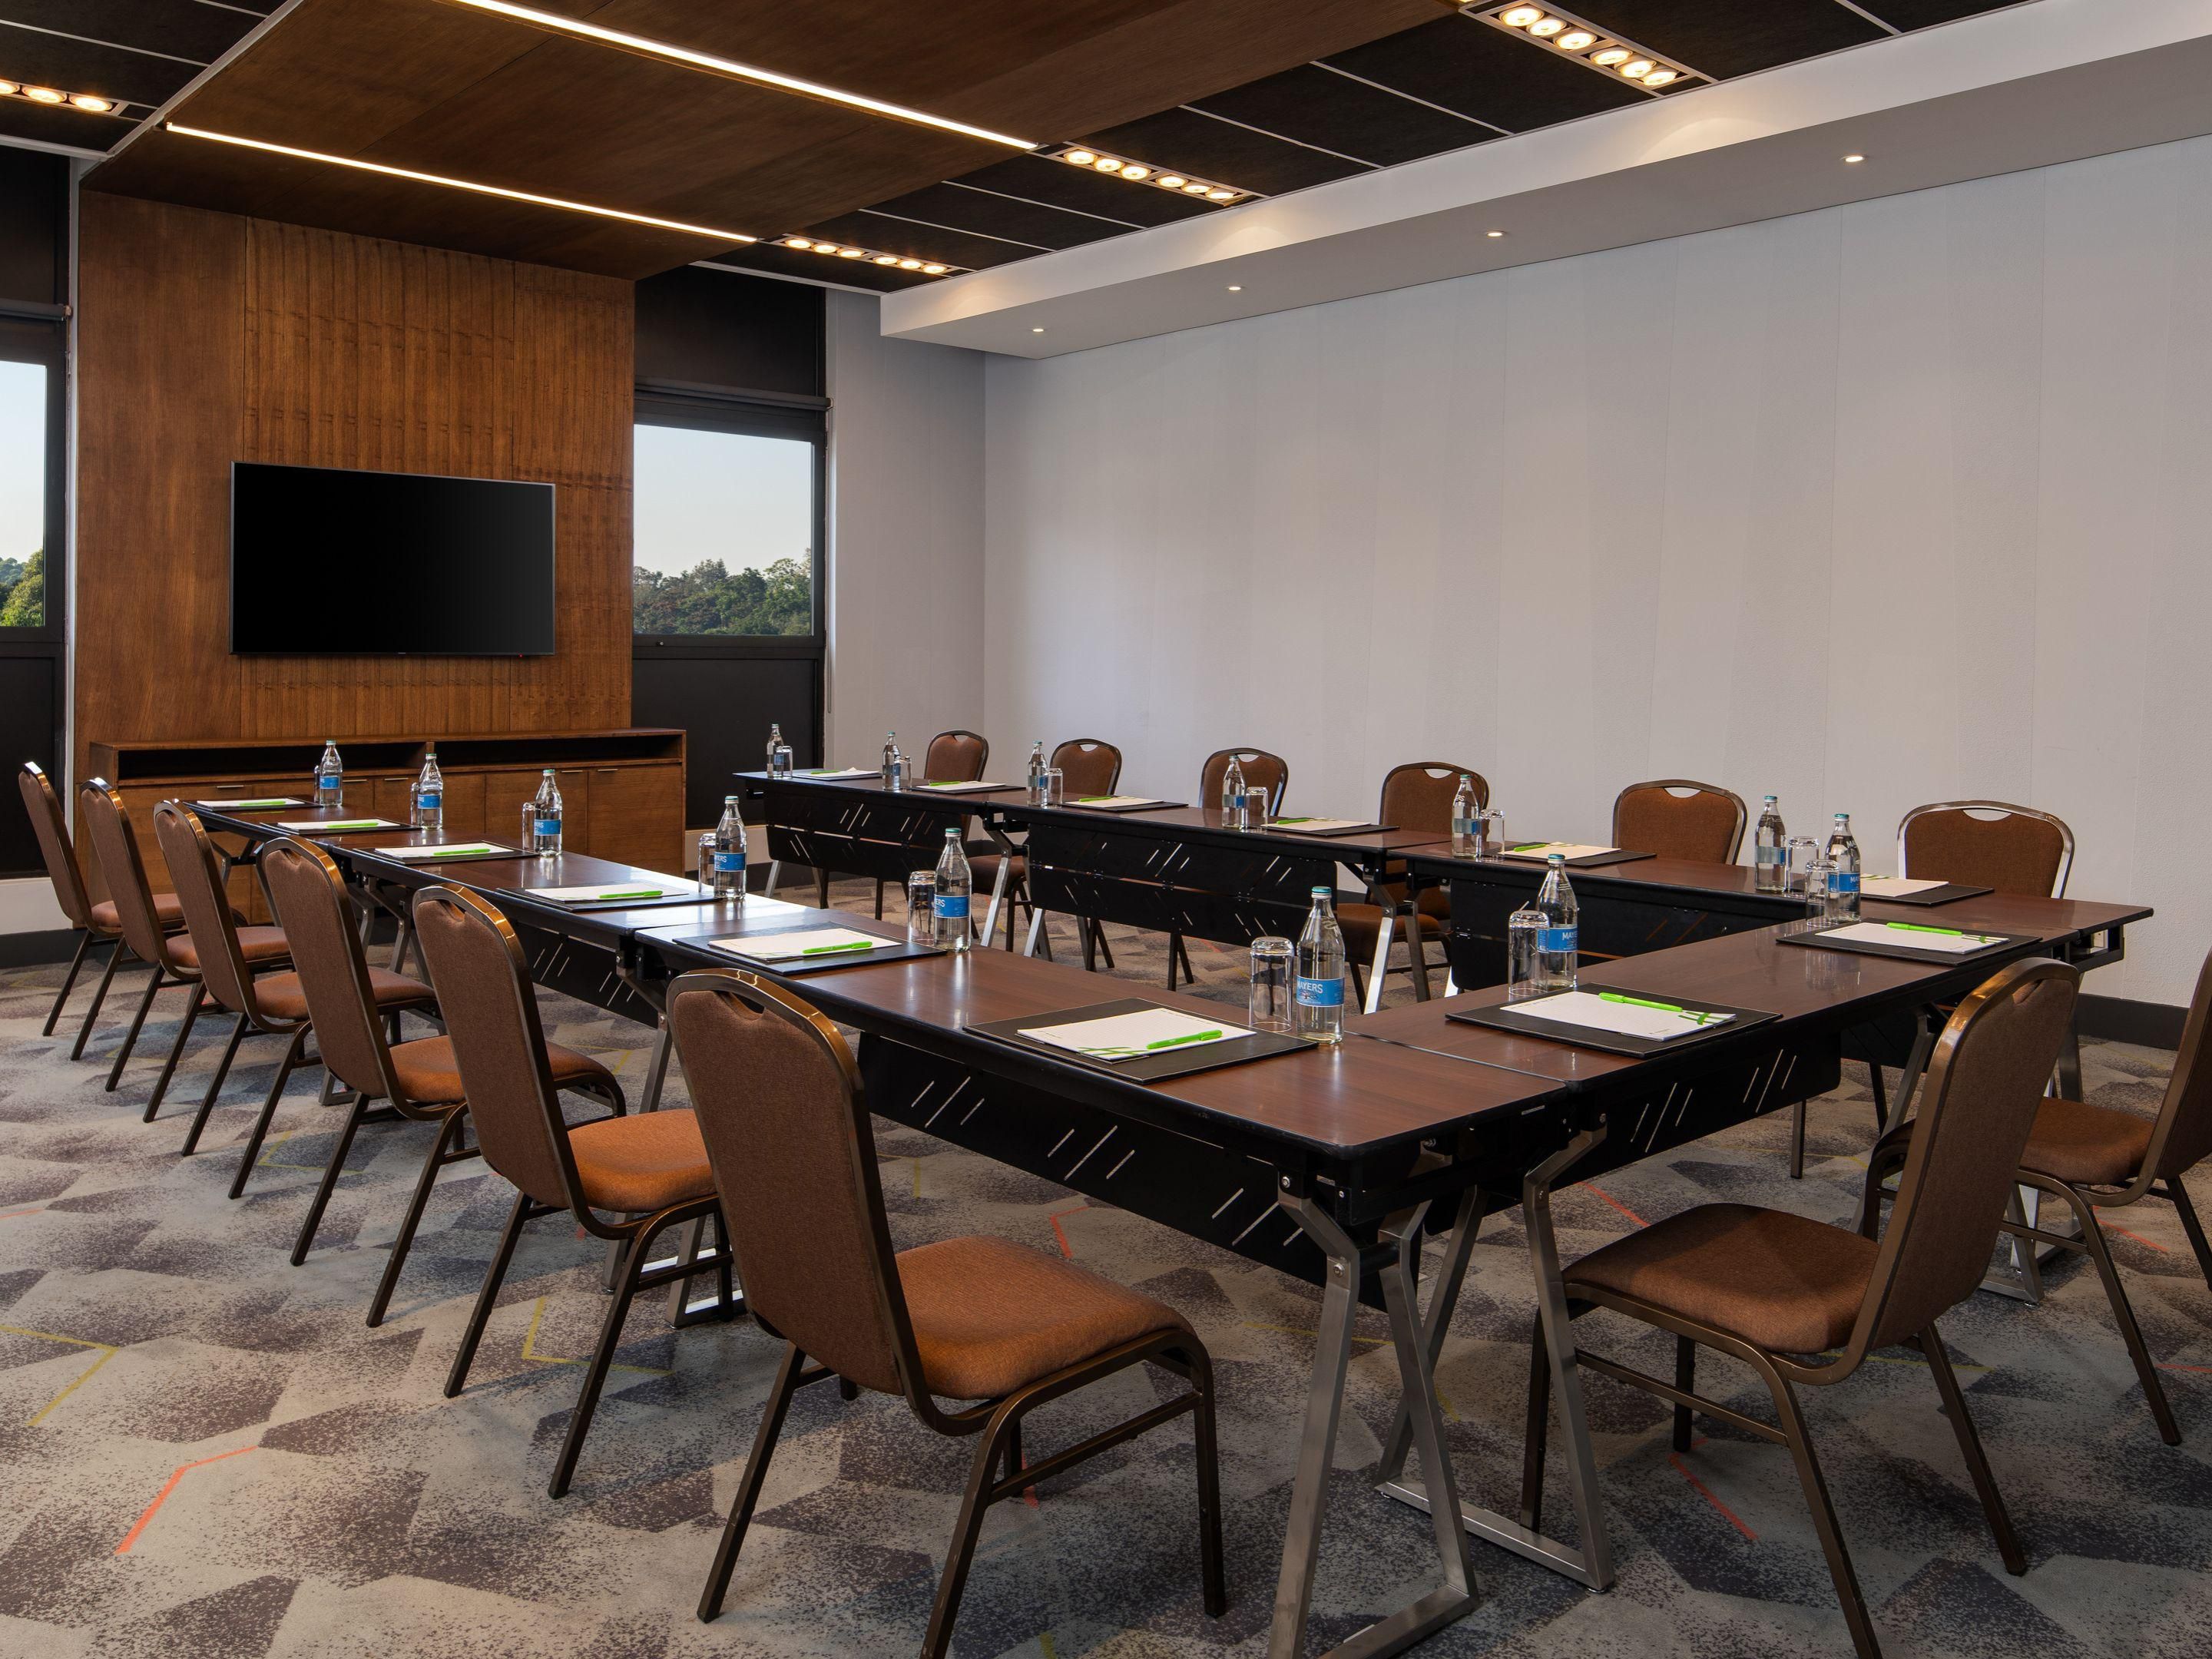 Host your next event in style at the heart of Nairobi. Our diverse meeting rooms can accommodate 6 to 120 guests, perfect for anything from corporate conferences to joyous celebrations. With high-speed internet, state-of-the-art audio-visual equipment, and tailor-made menus, your gathering is sure to shine at our prime meeting rooms in Nairobi.